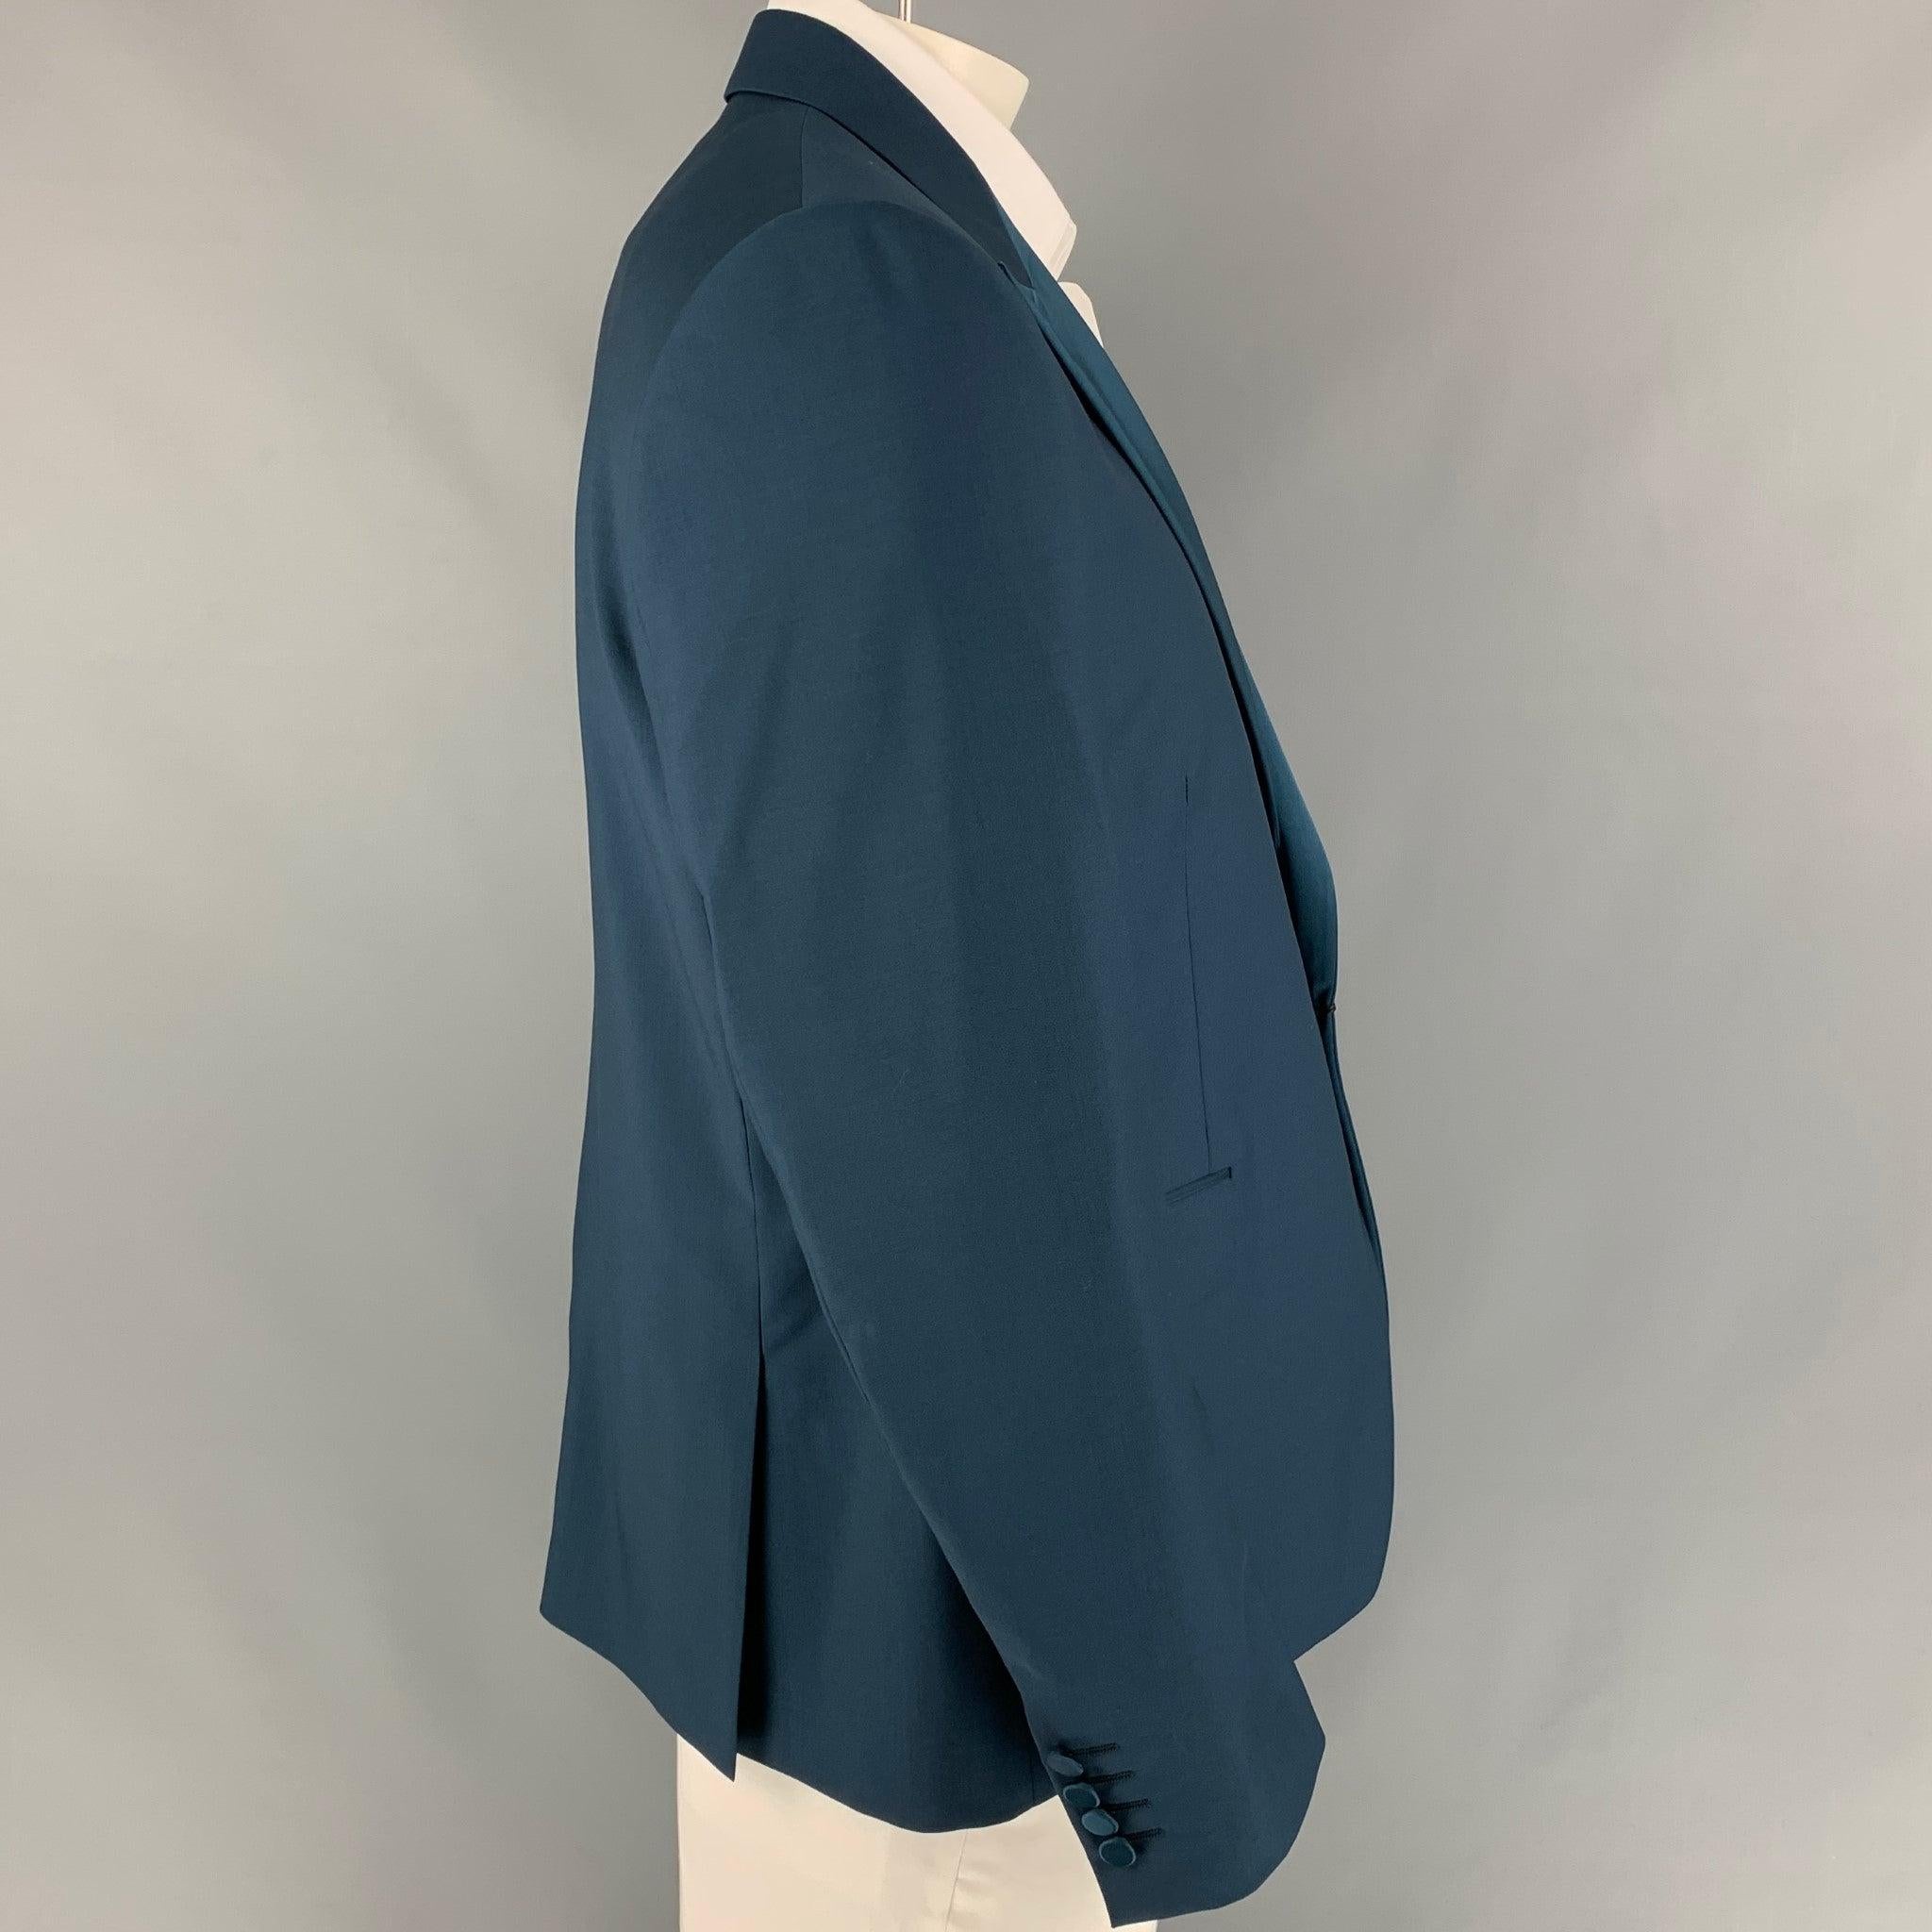 PAUL SMITH Soho Fit Size 46 Teal Wool / Mohair Peak Lapel Sport Coat In Good Condition For Sale In San Francisco, CA